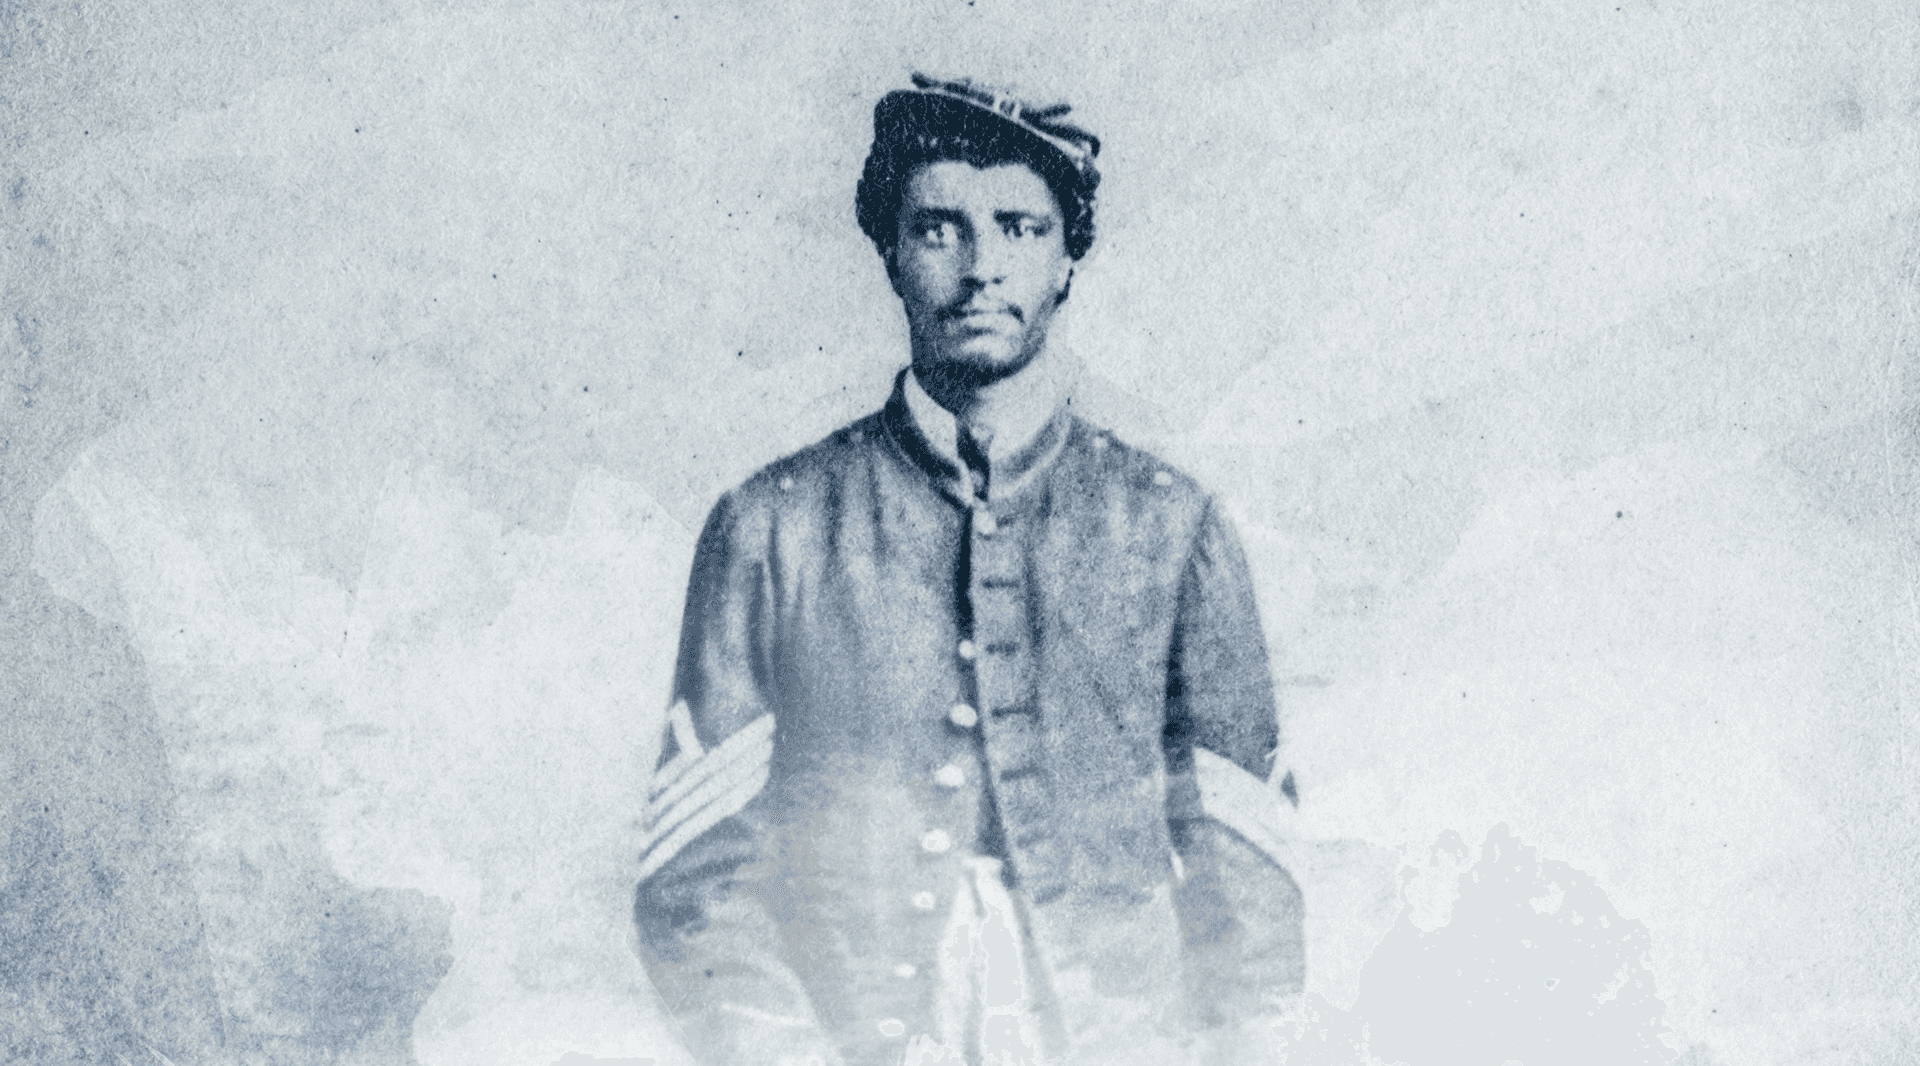 Blue, faded photograph of soldier in Civil War-era uniform and hat